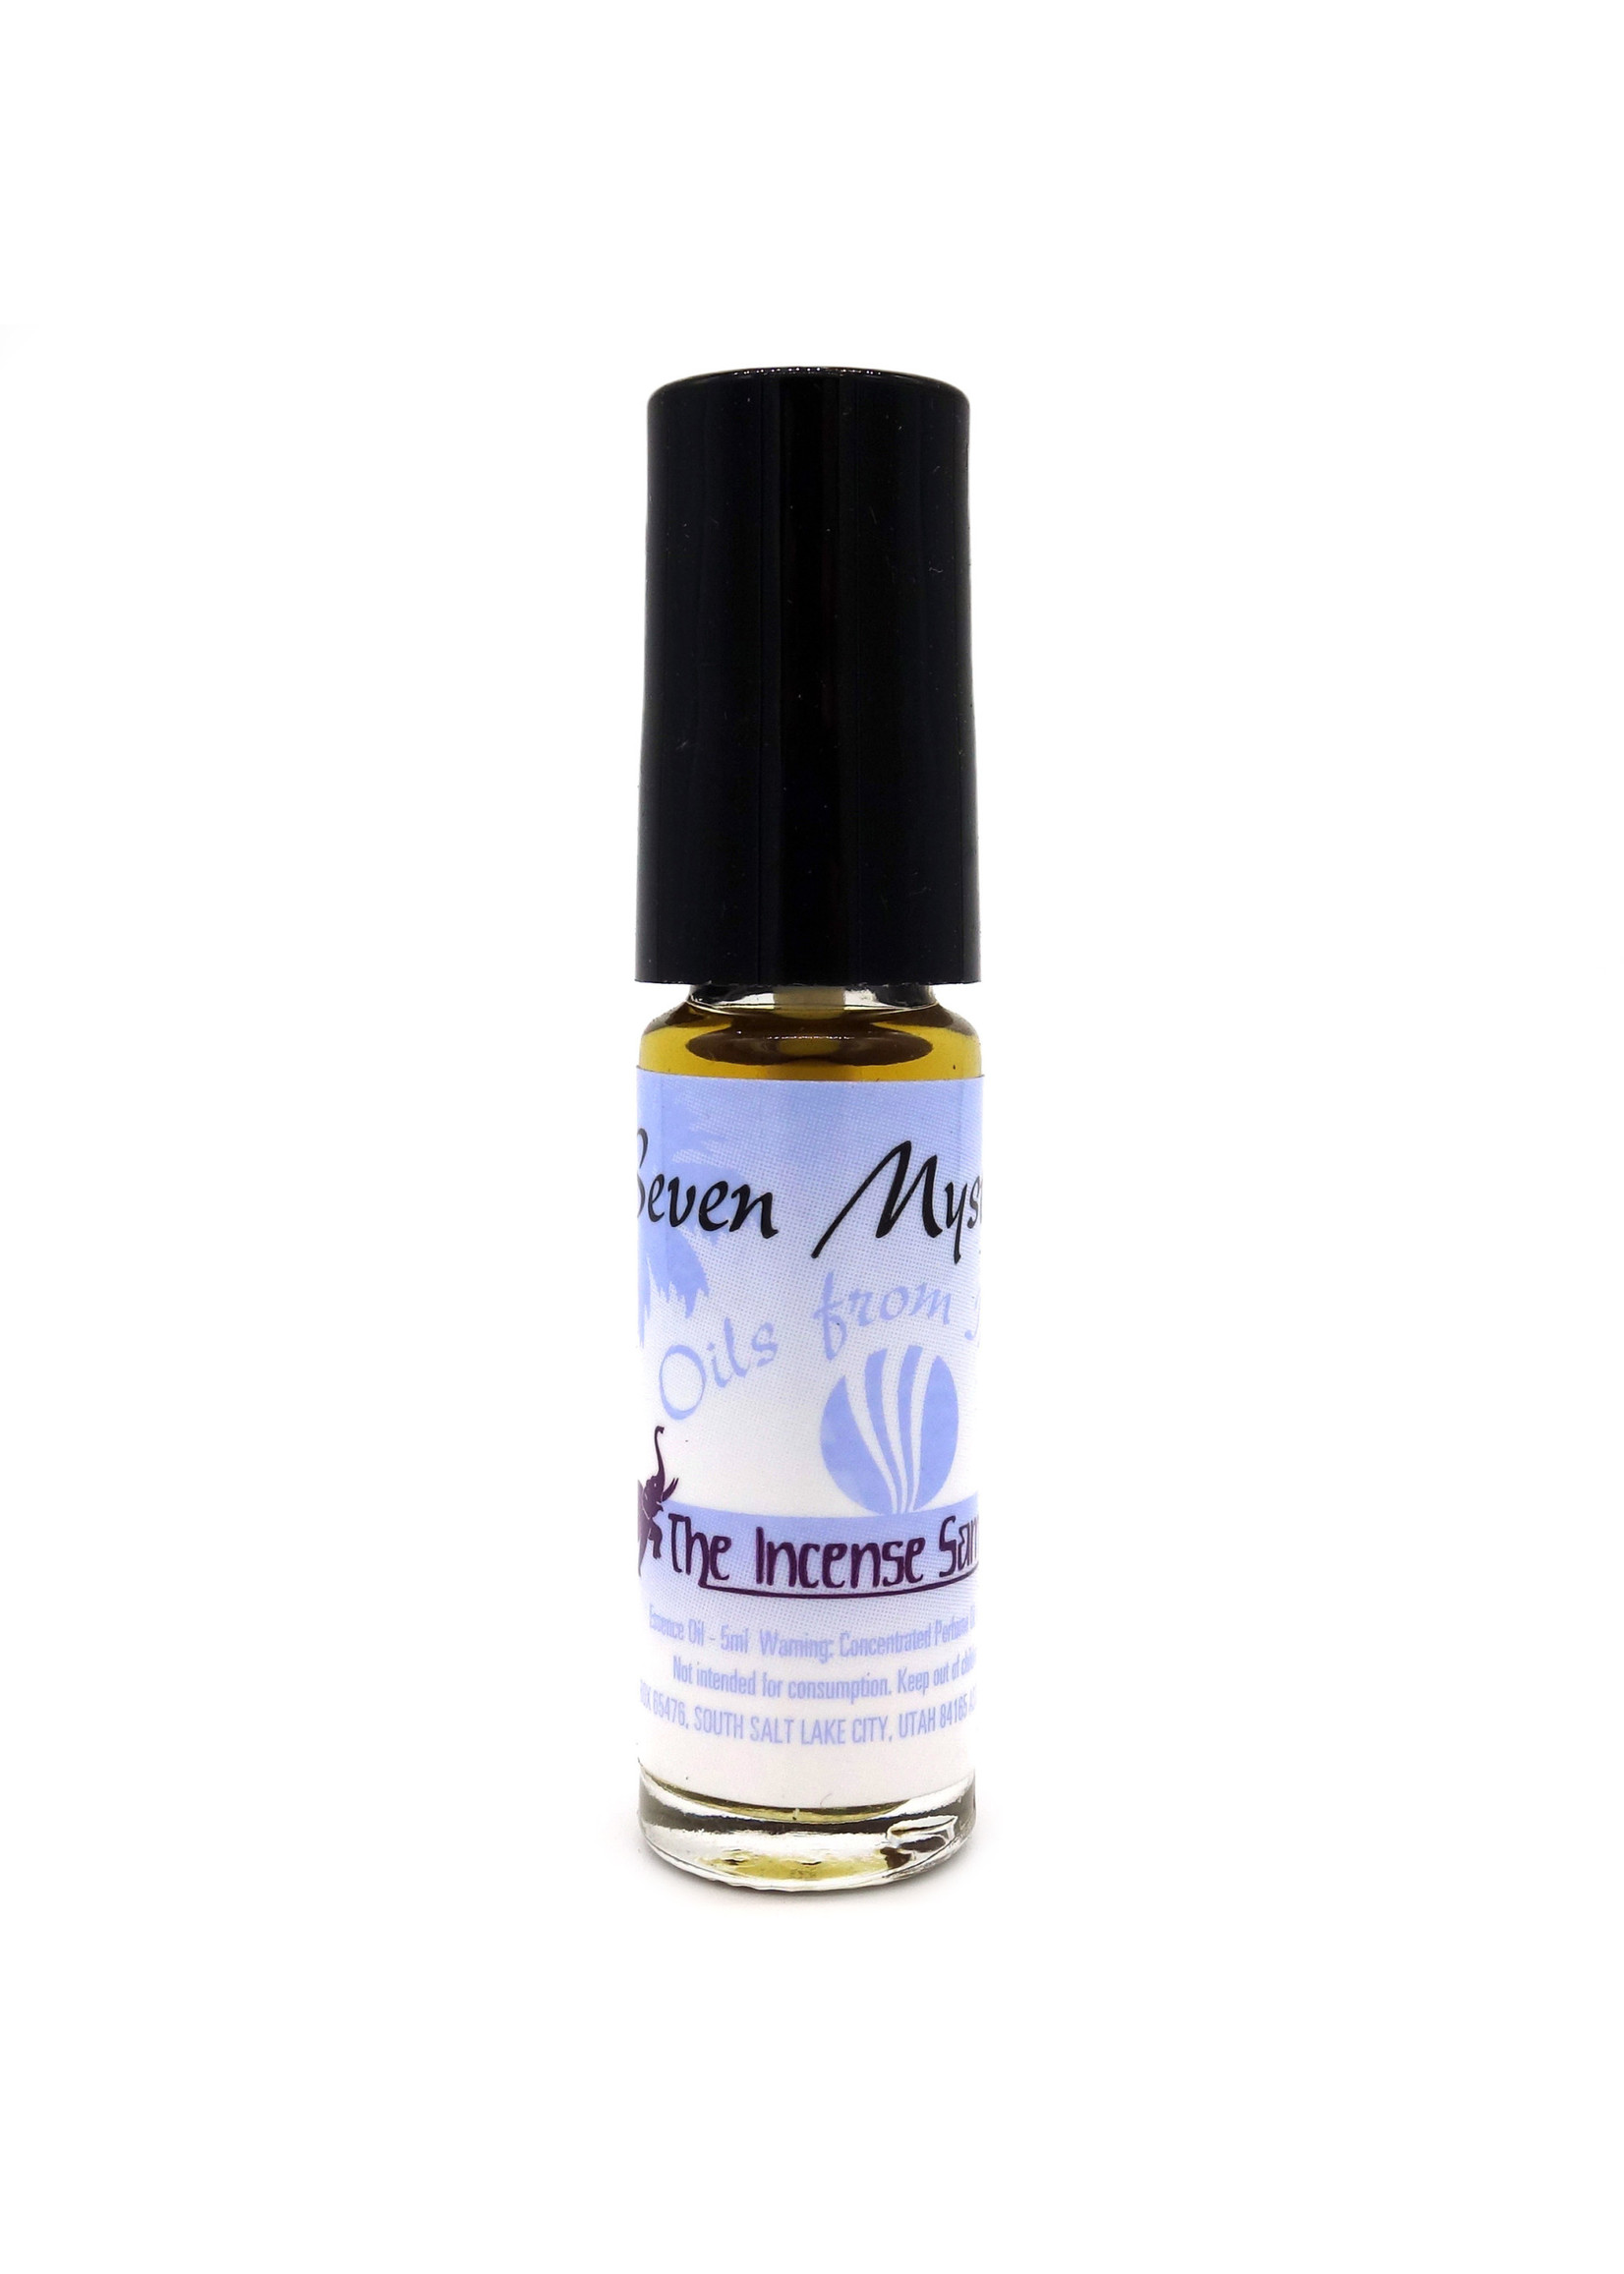 Oils From India Seven Mysteries Perfume Oil 5ml